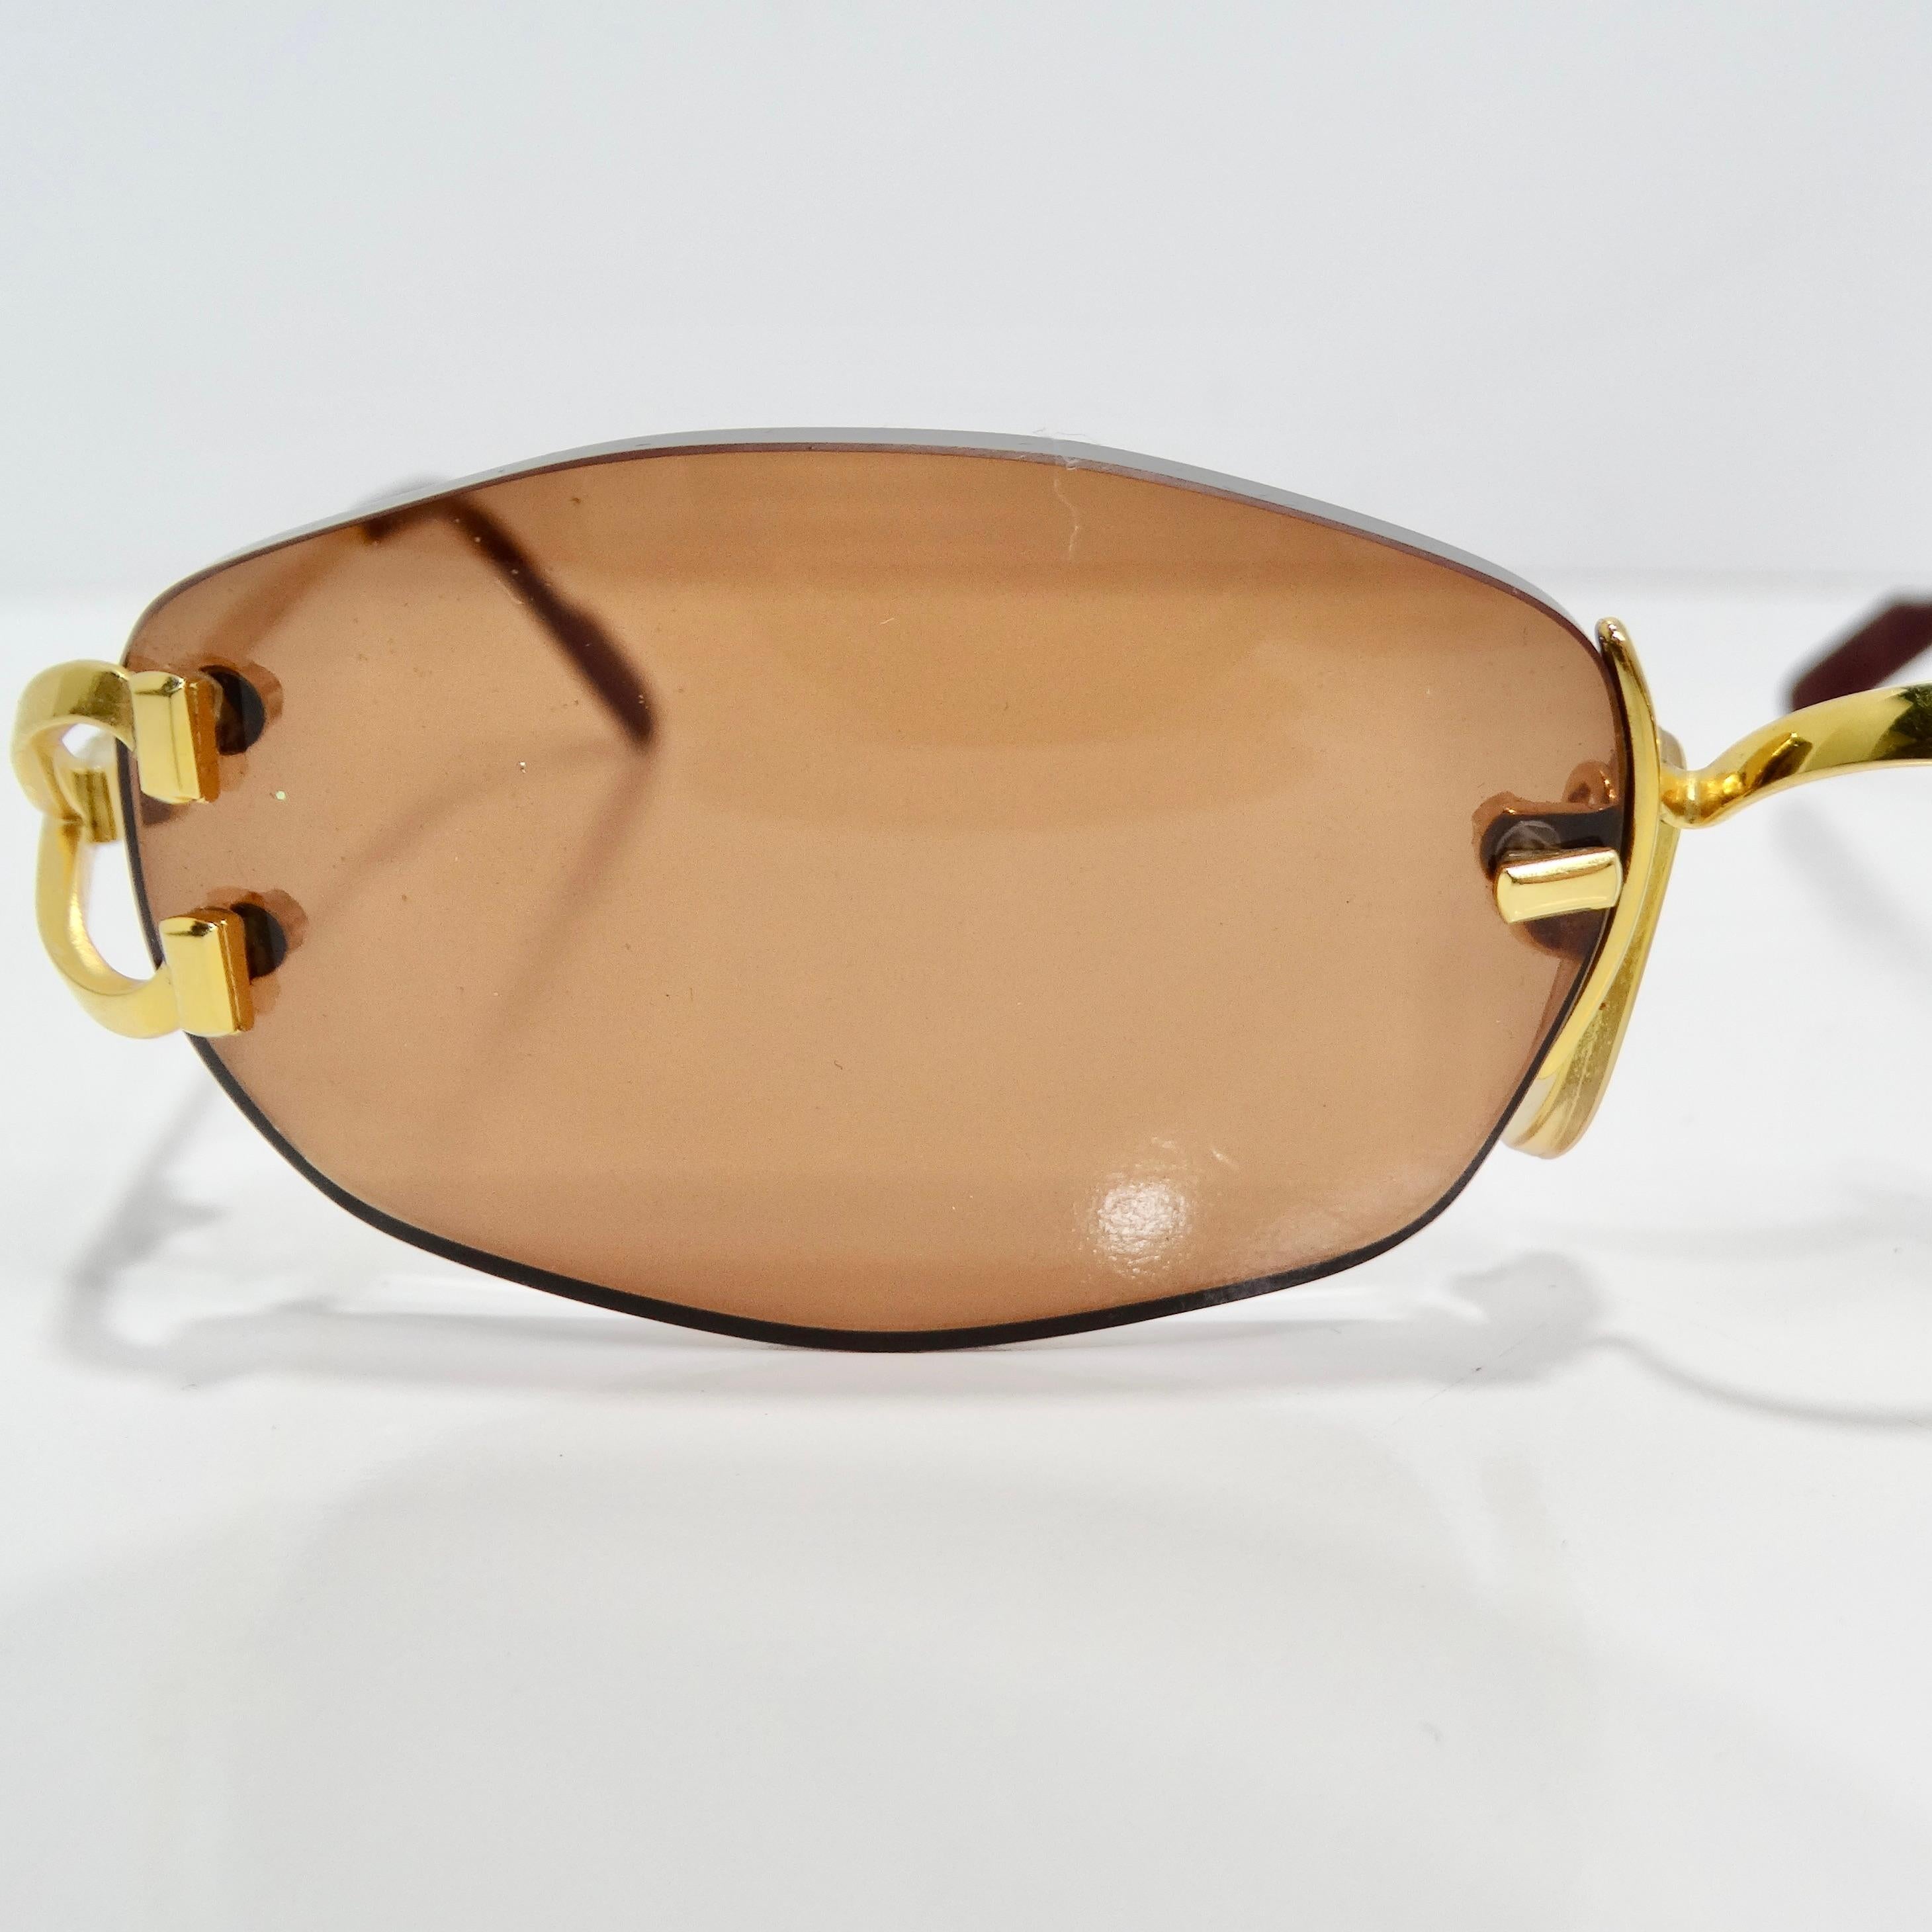 Introducing the Cartier 1990s Gold Tone Capri Sunglasses, a luxurious and timeless accessory that exudes elegance and sophistication. Crafted with meticulous attention to detail, these rimless sunglasses are designed to make a bold statement while